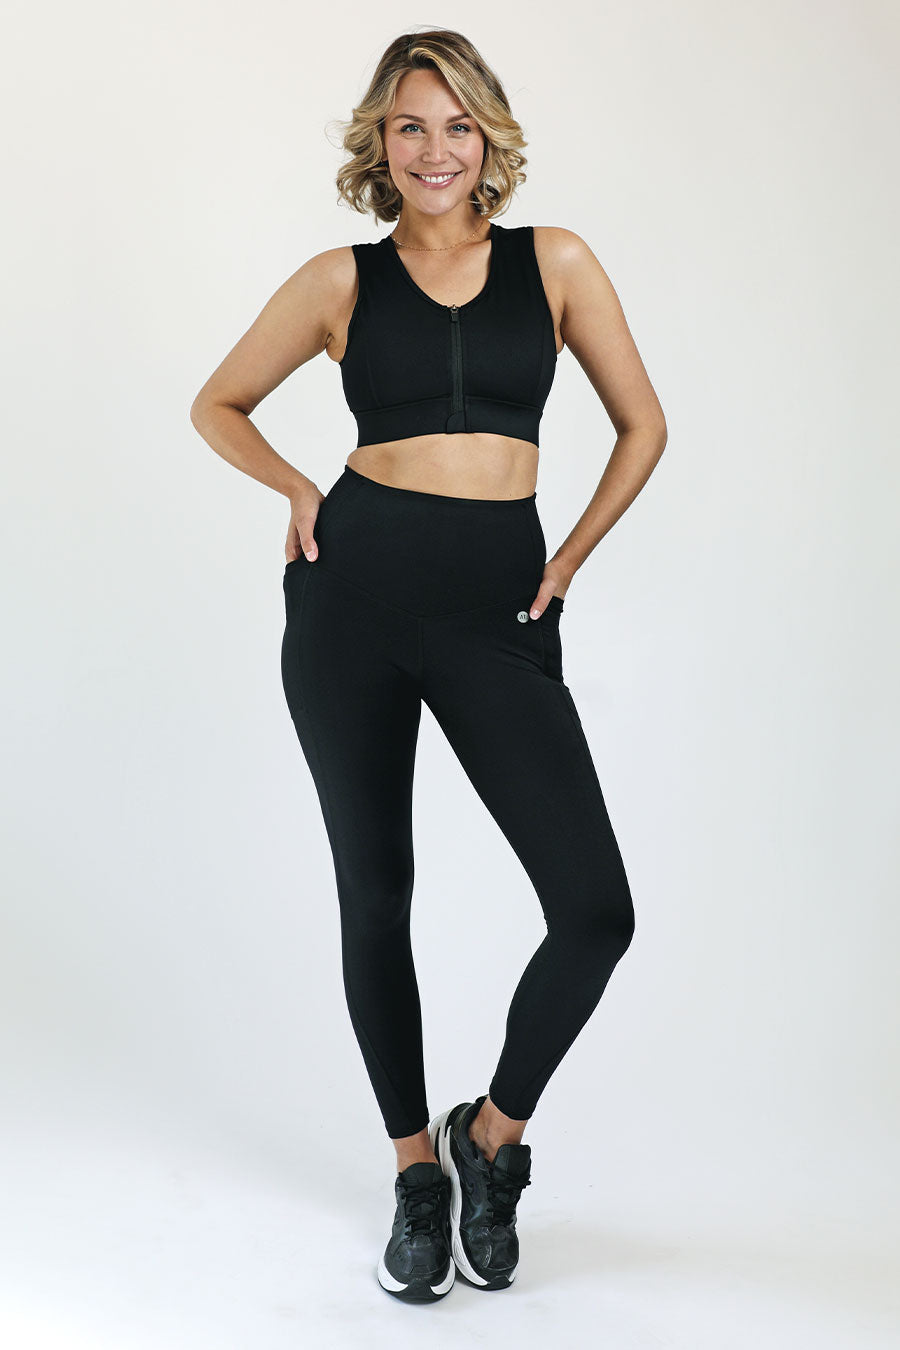 What To Wear Under Workout Leggings